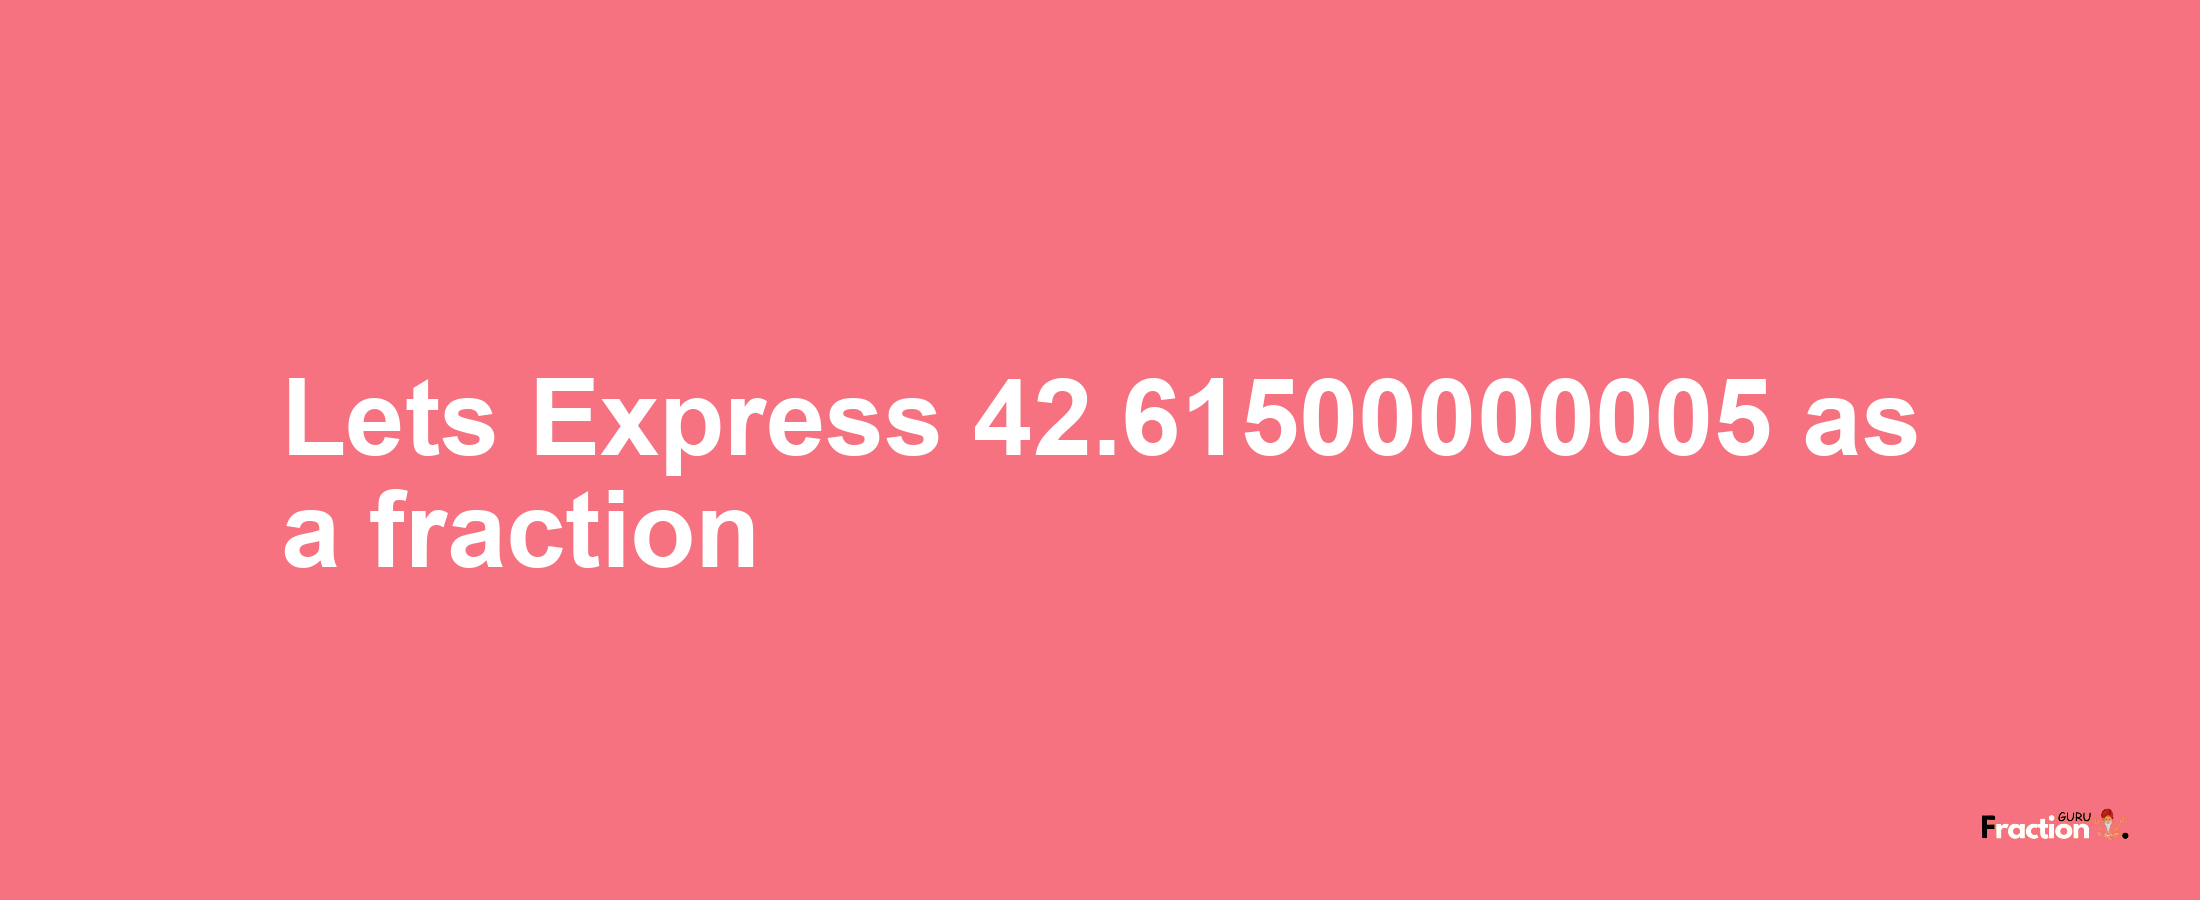 Lets Express 42.61500000005 as afraction